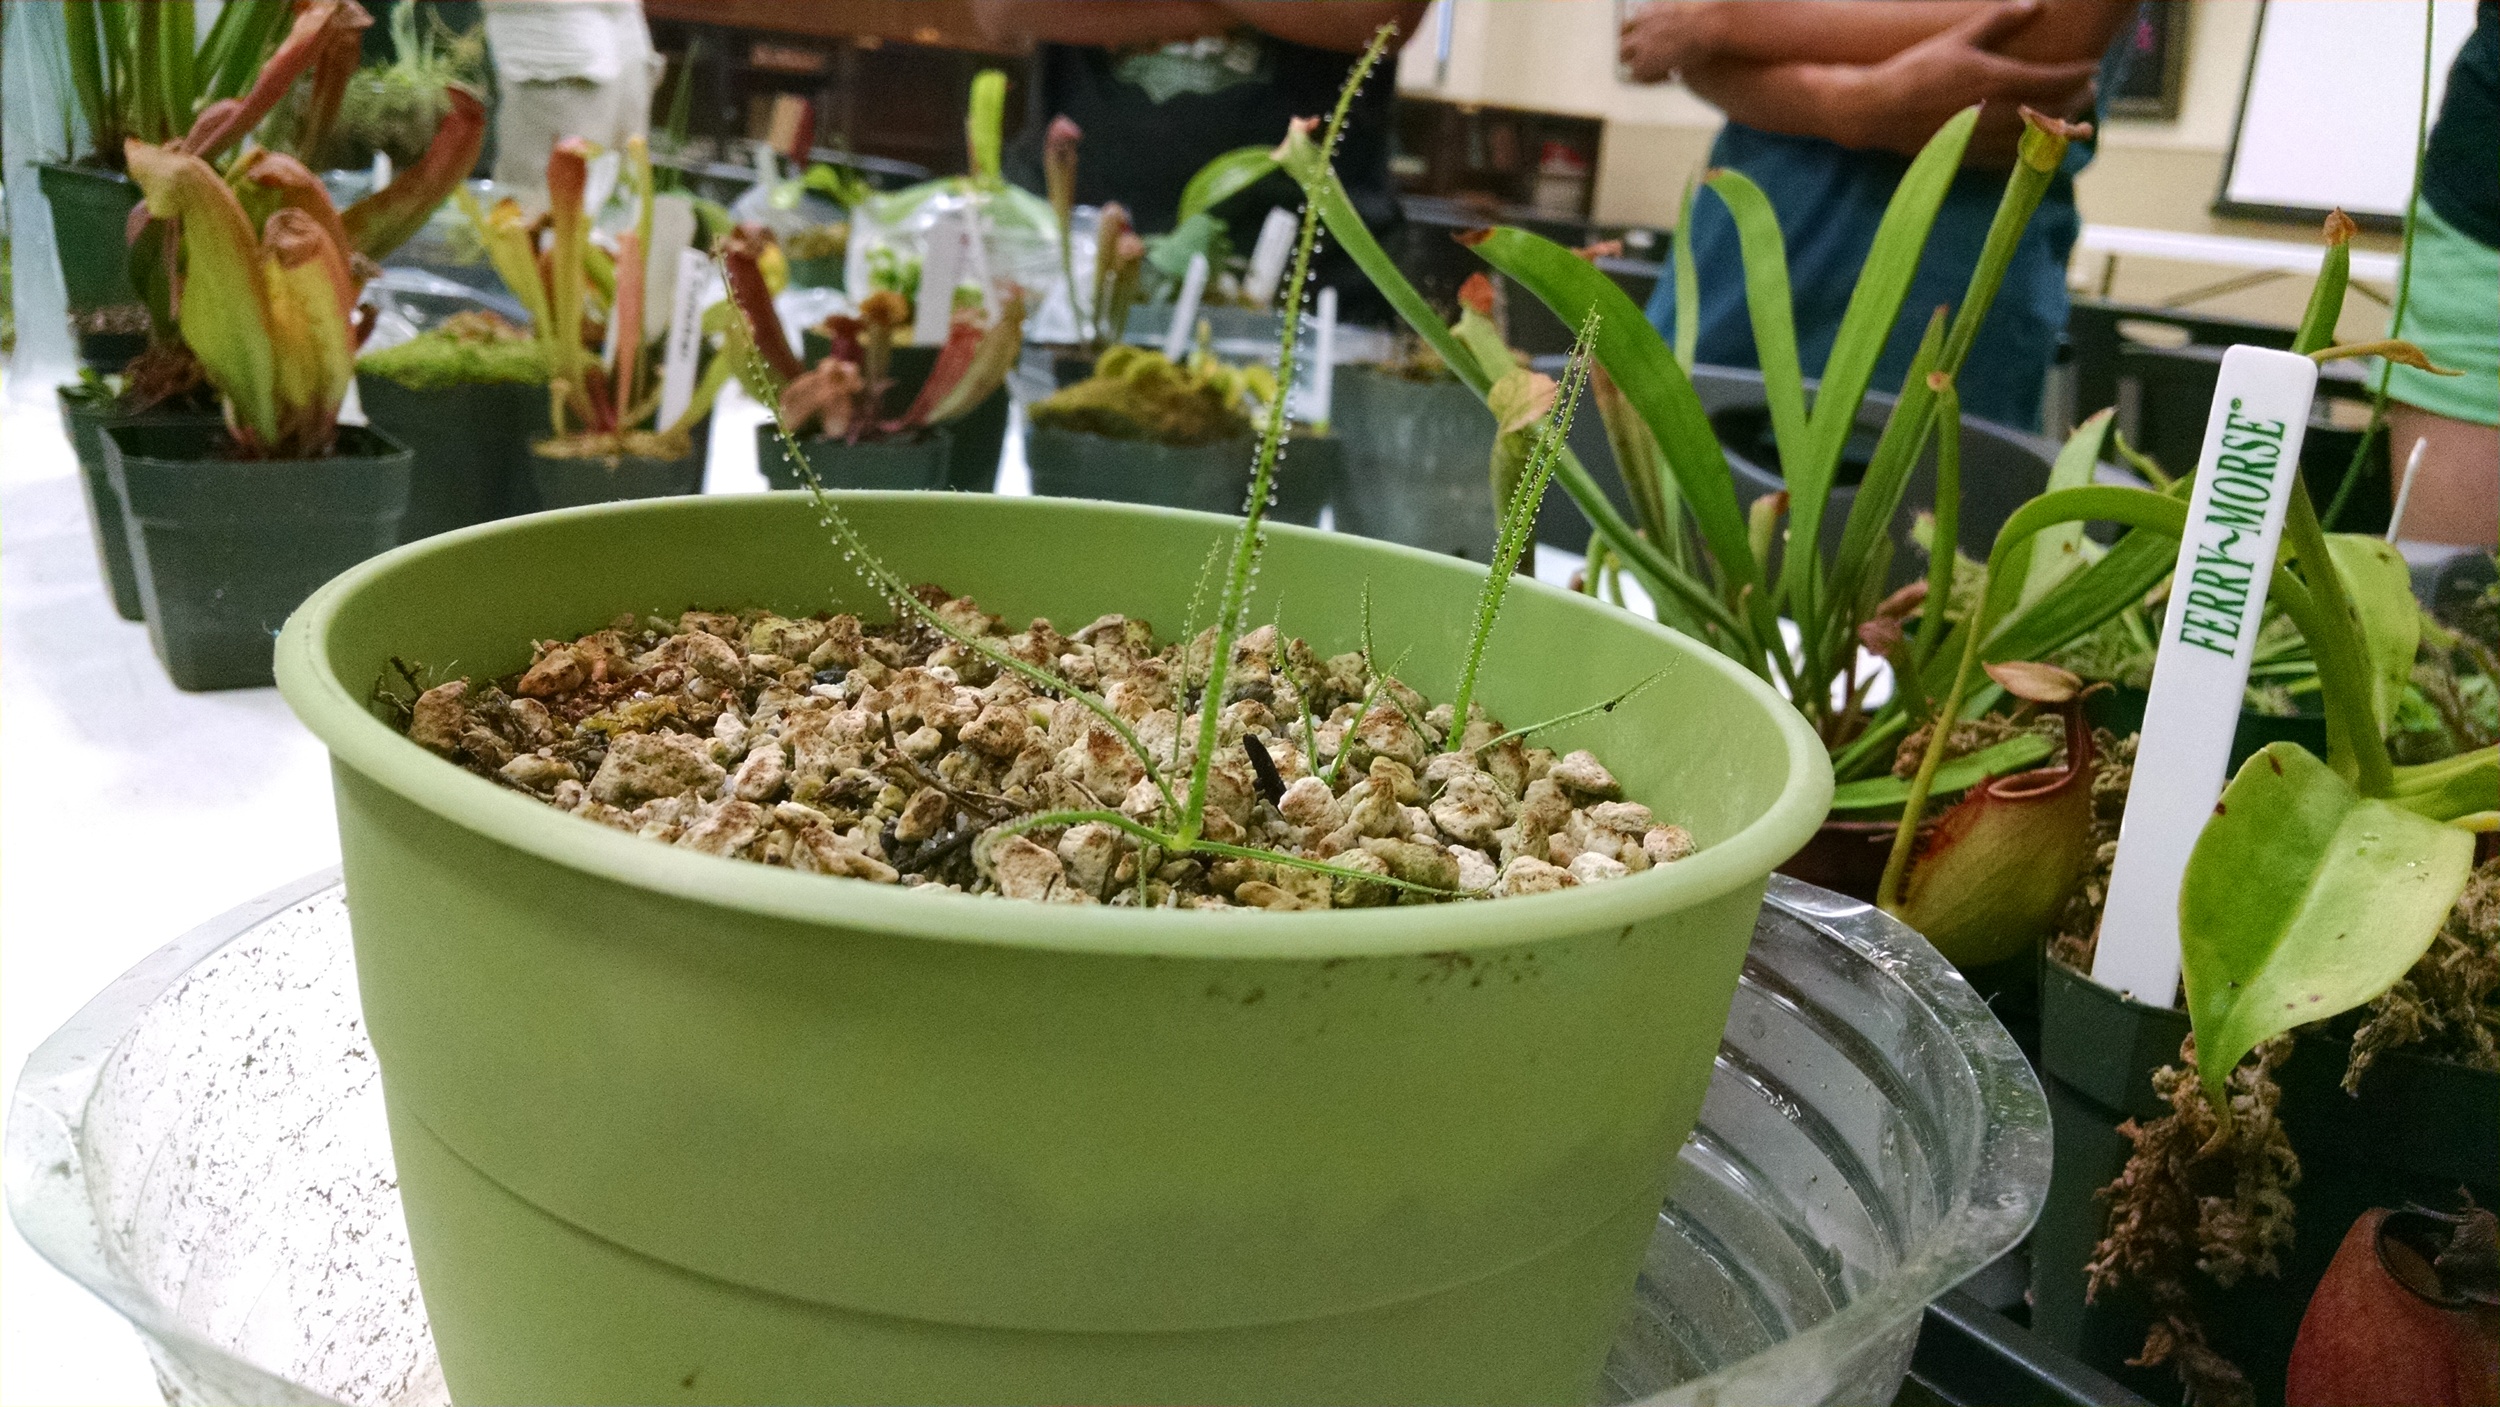 Adrian's Drosophyllum lusitanicum that was started from the seed given by SD Zoo's Judy Bell at the July 2015 meeting!